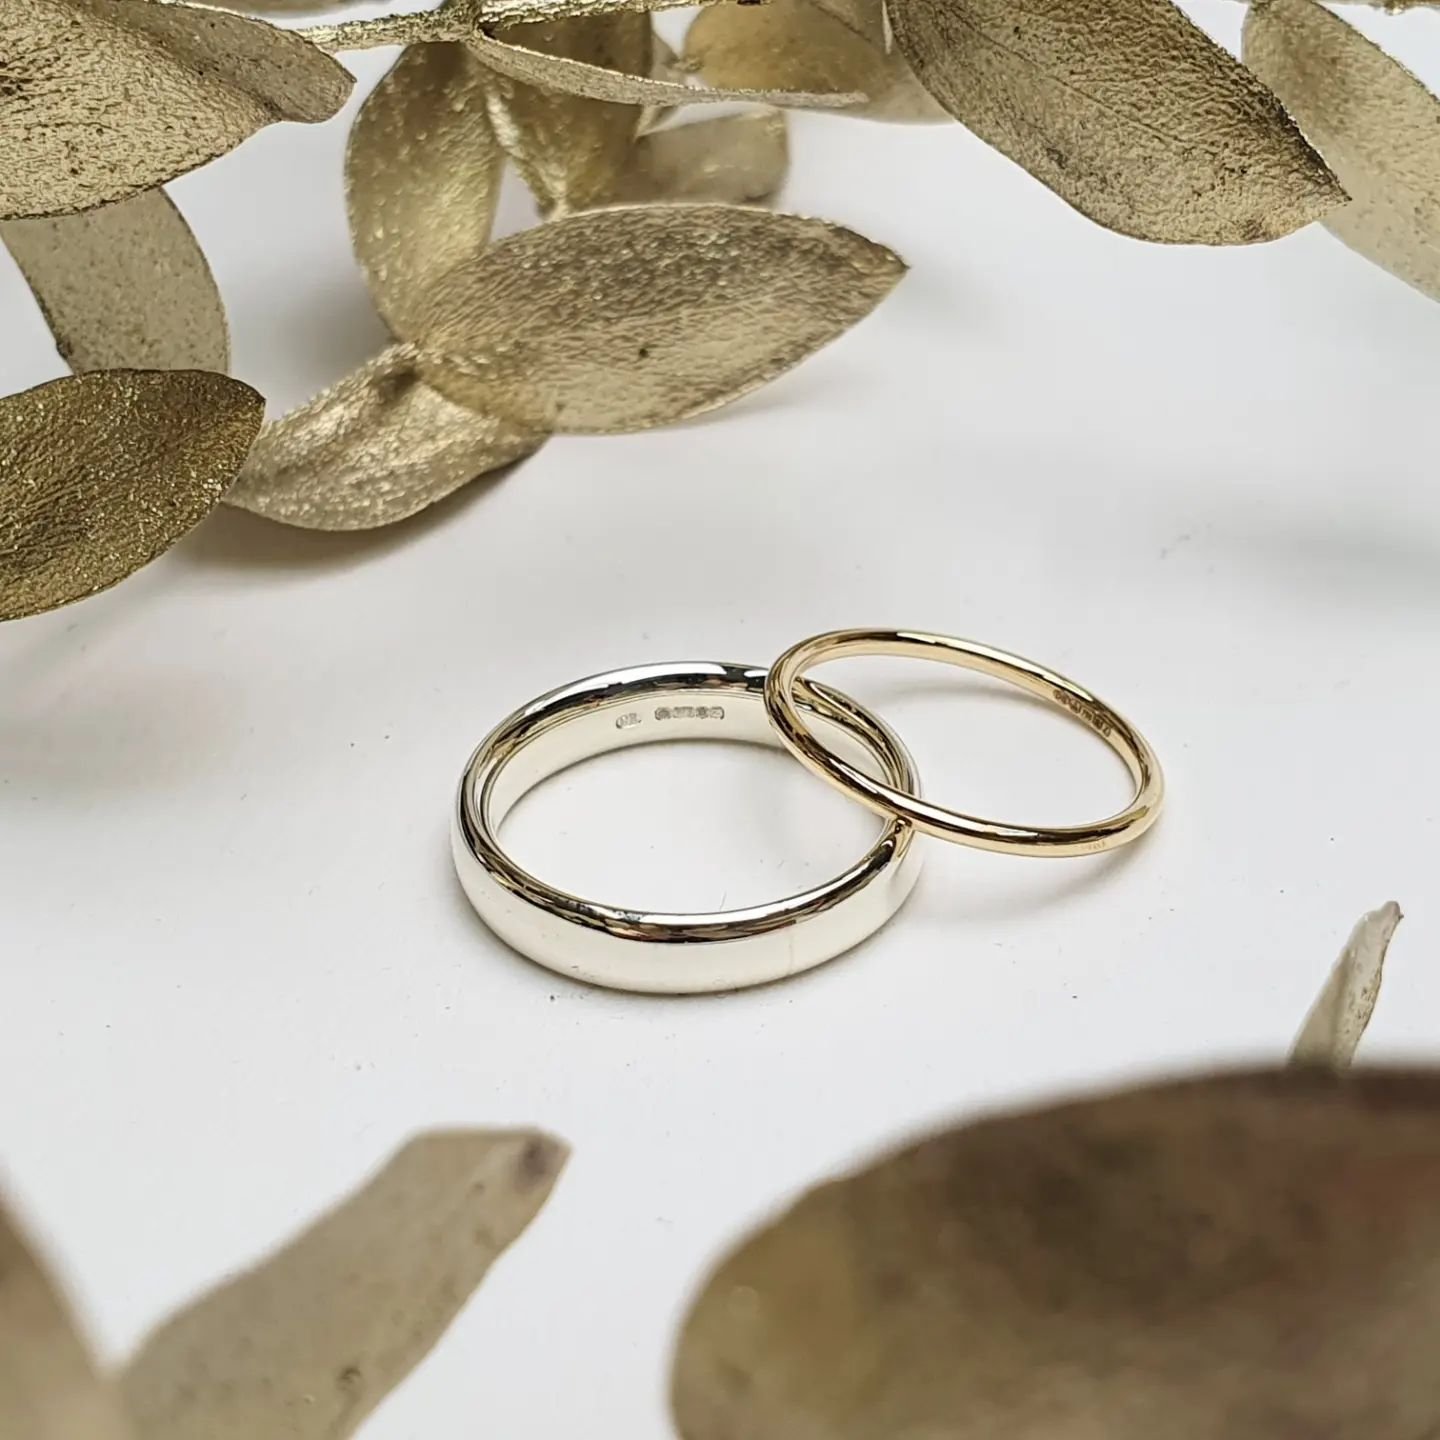 Handmade wedding rings in 9ct white gold and 18ct yellow gold for J &amp; D. All polished up, hallmarked and have just arrived with their lovely new owners. 🥰

Happy Friday everyone and to those lovely couples who are getting married this weekend, h